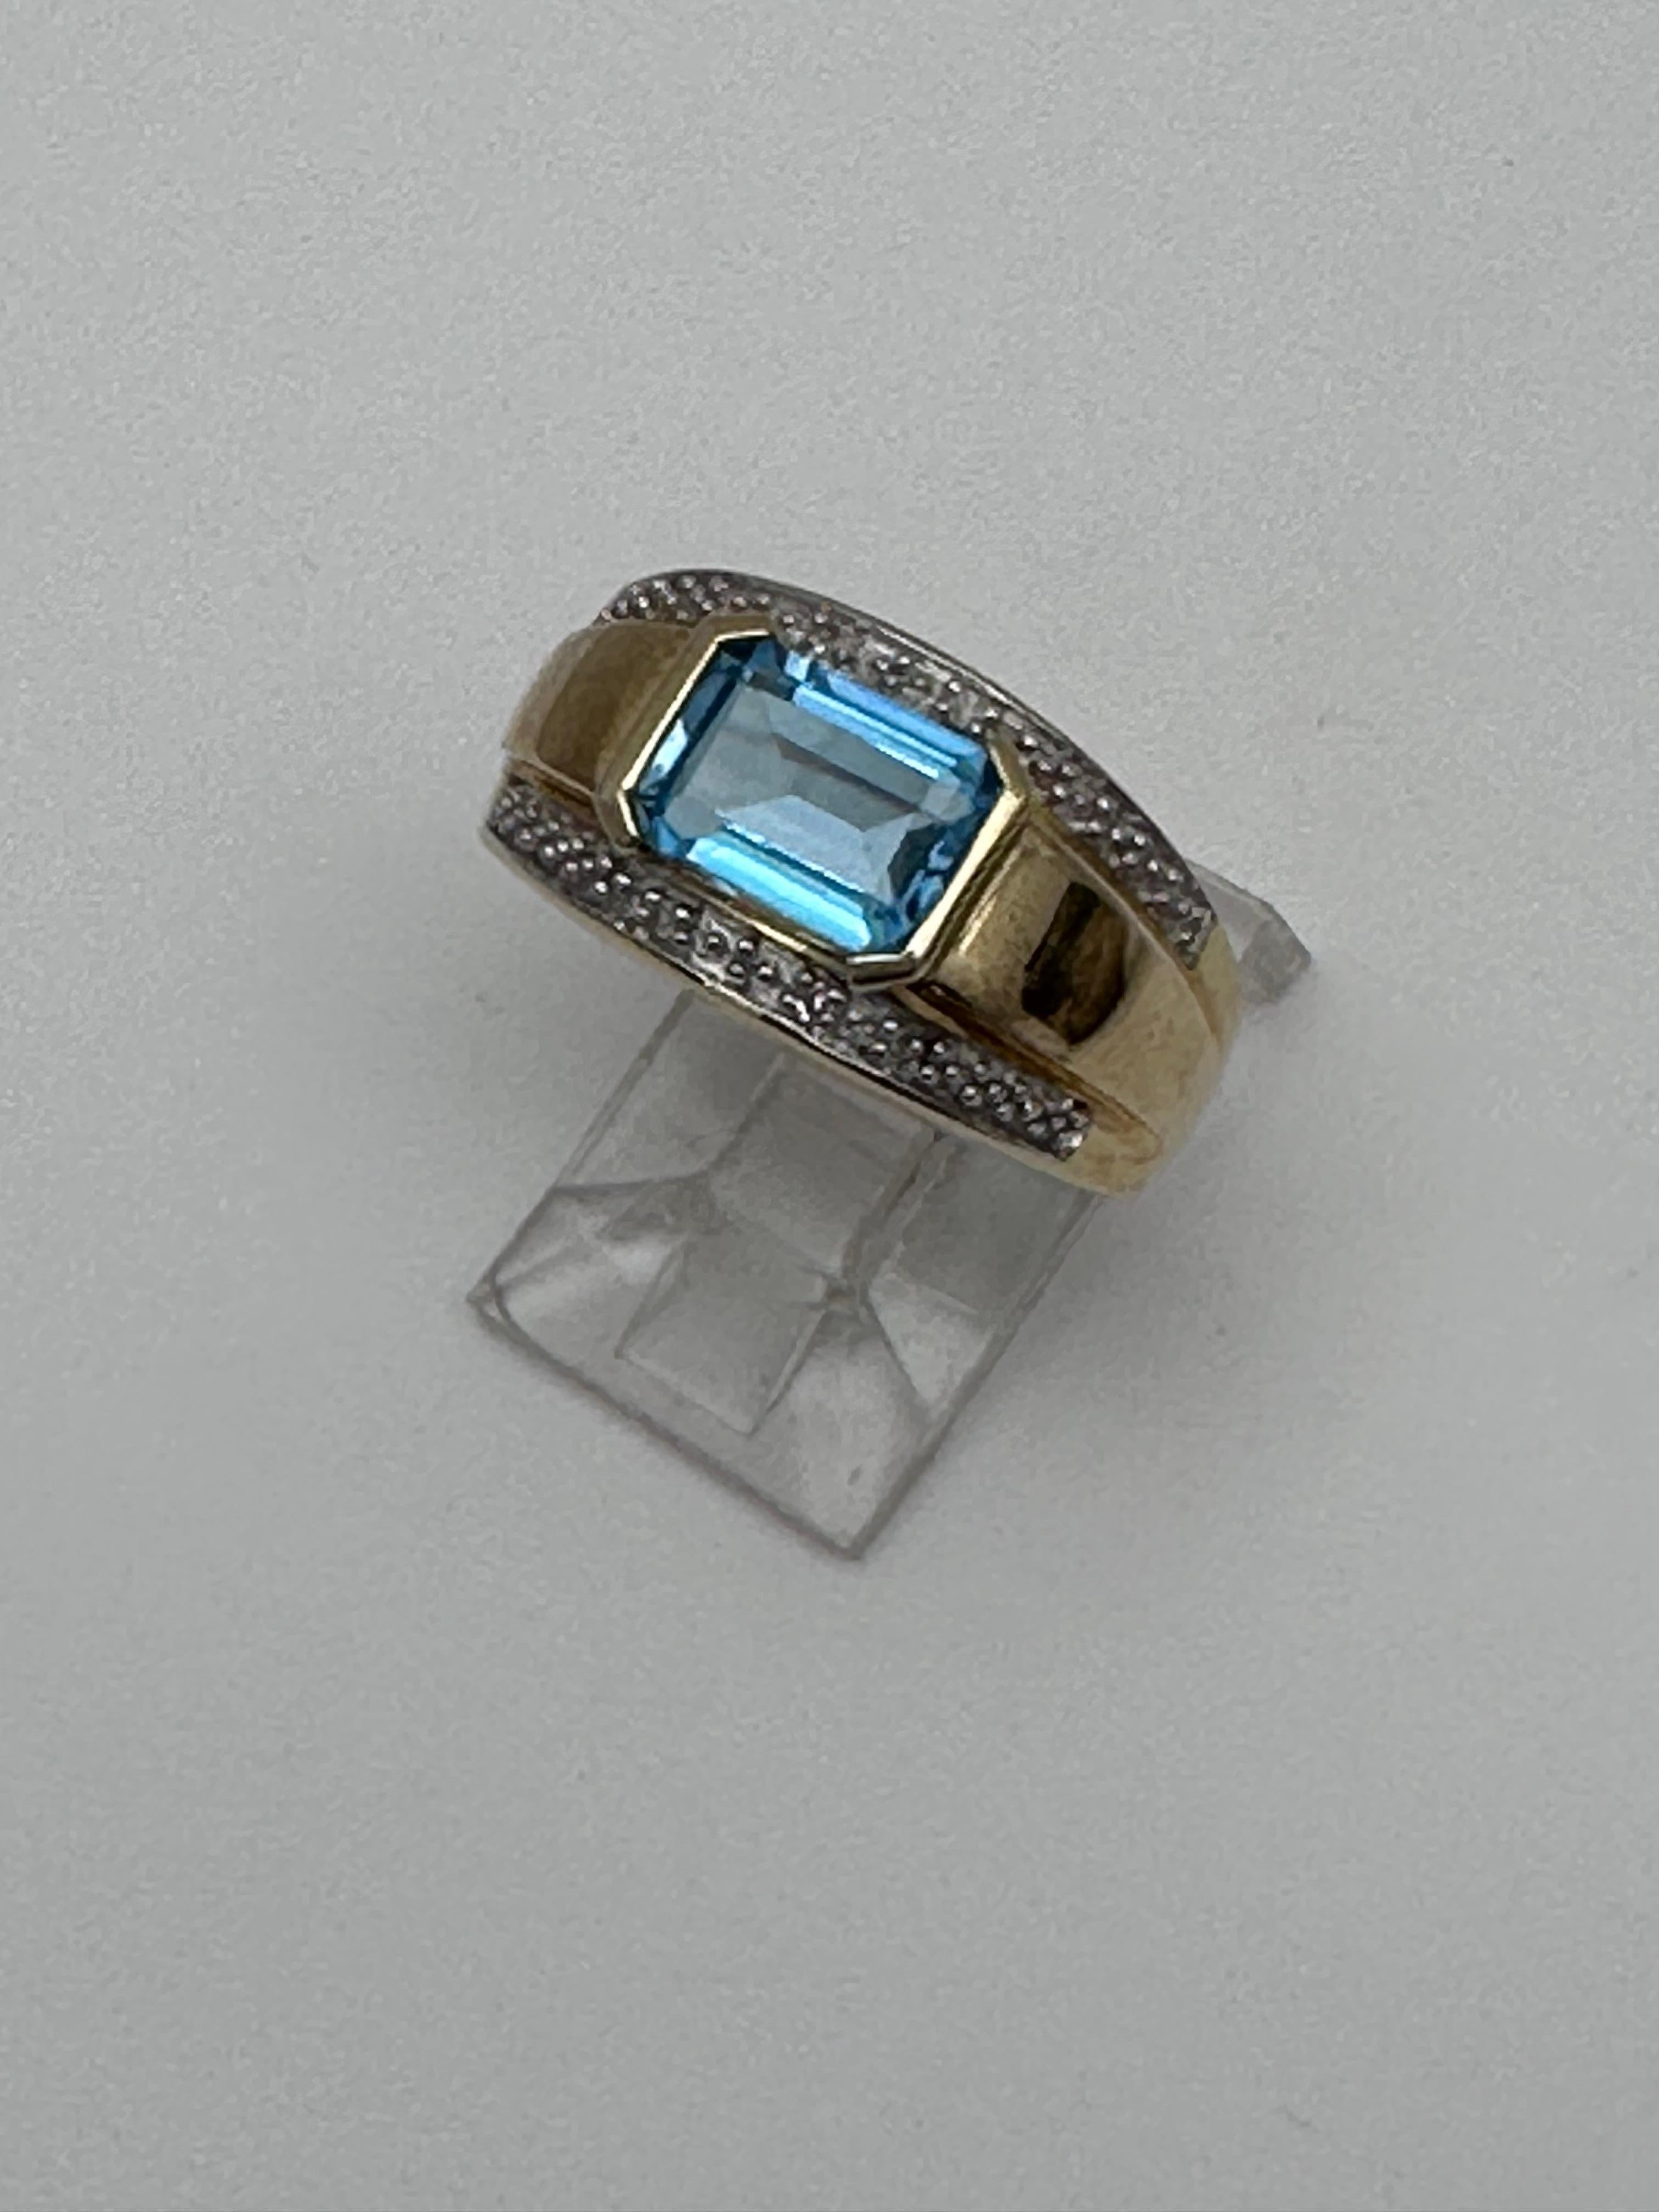 10k Yellow Gold 6mm x 8mm Emerald Cut Blue Topaz Diamond Ring Size 7 For Sale 1